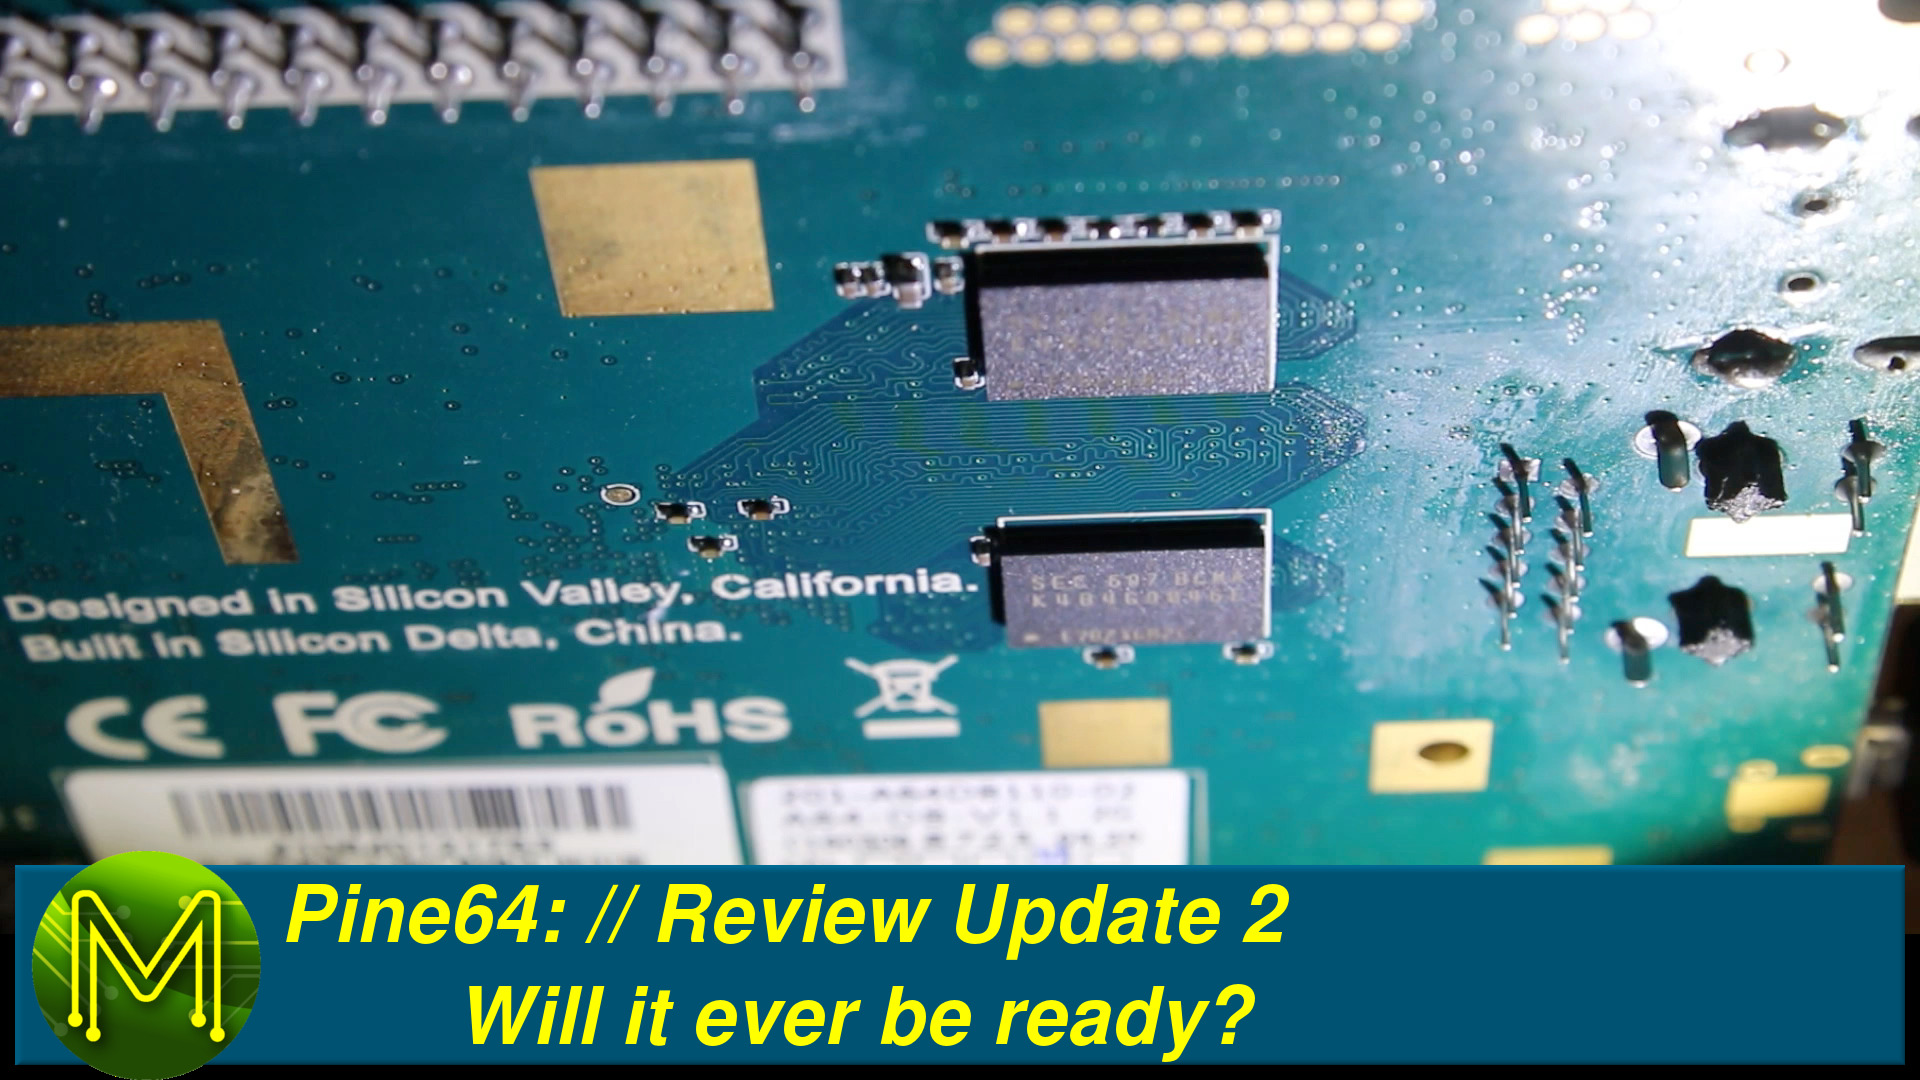 Pine64: Will it ever be ready? // Review Update 2